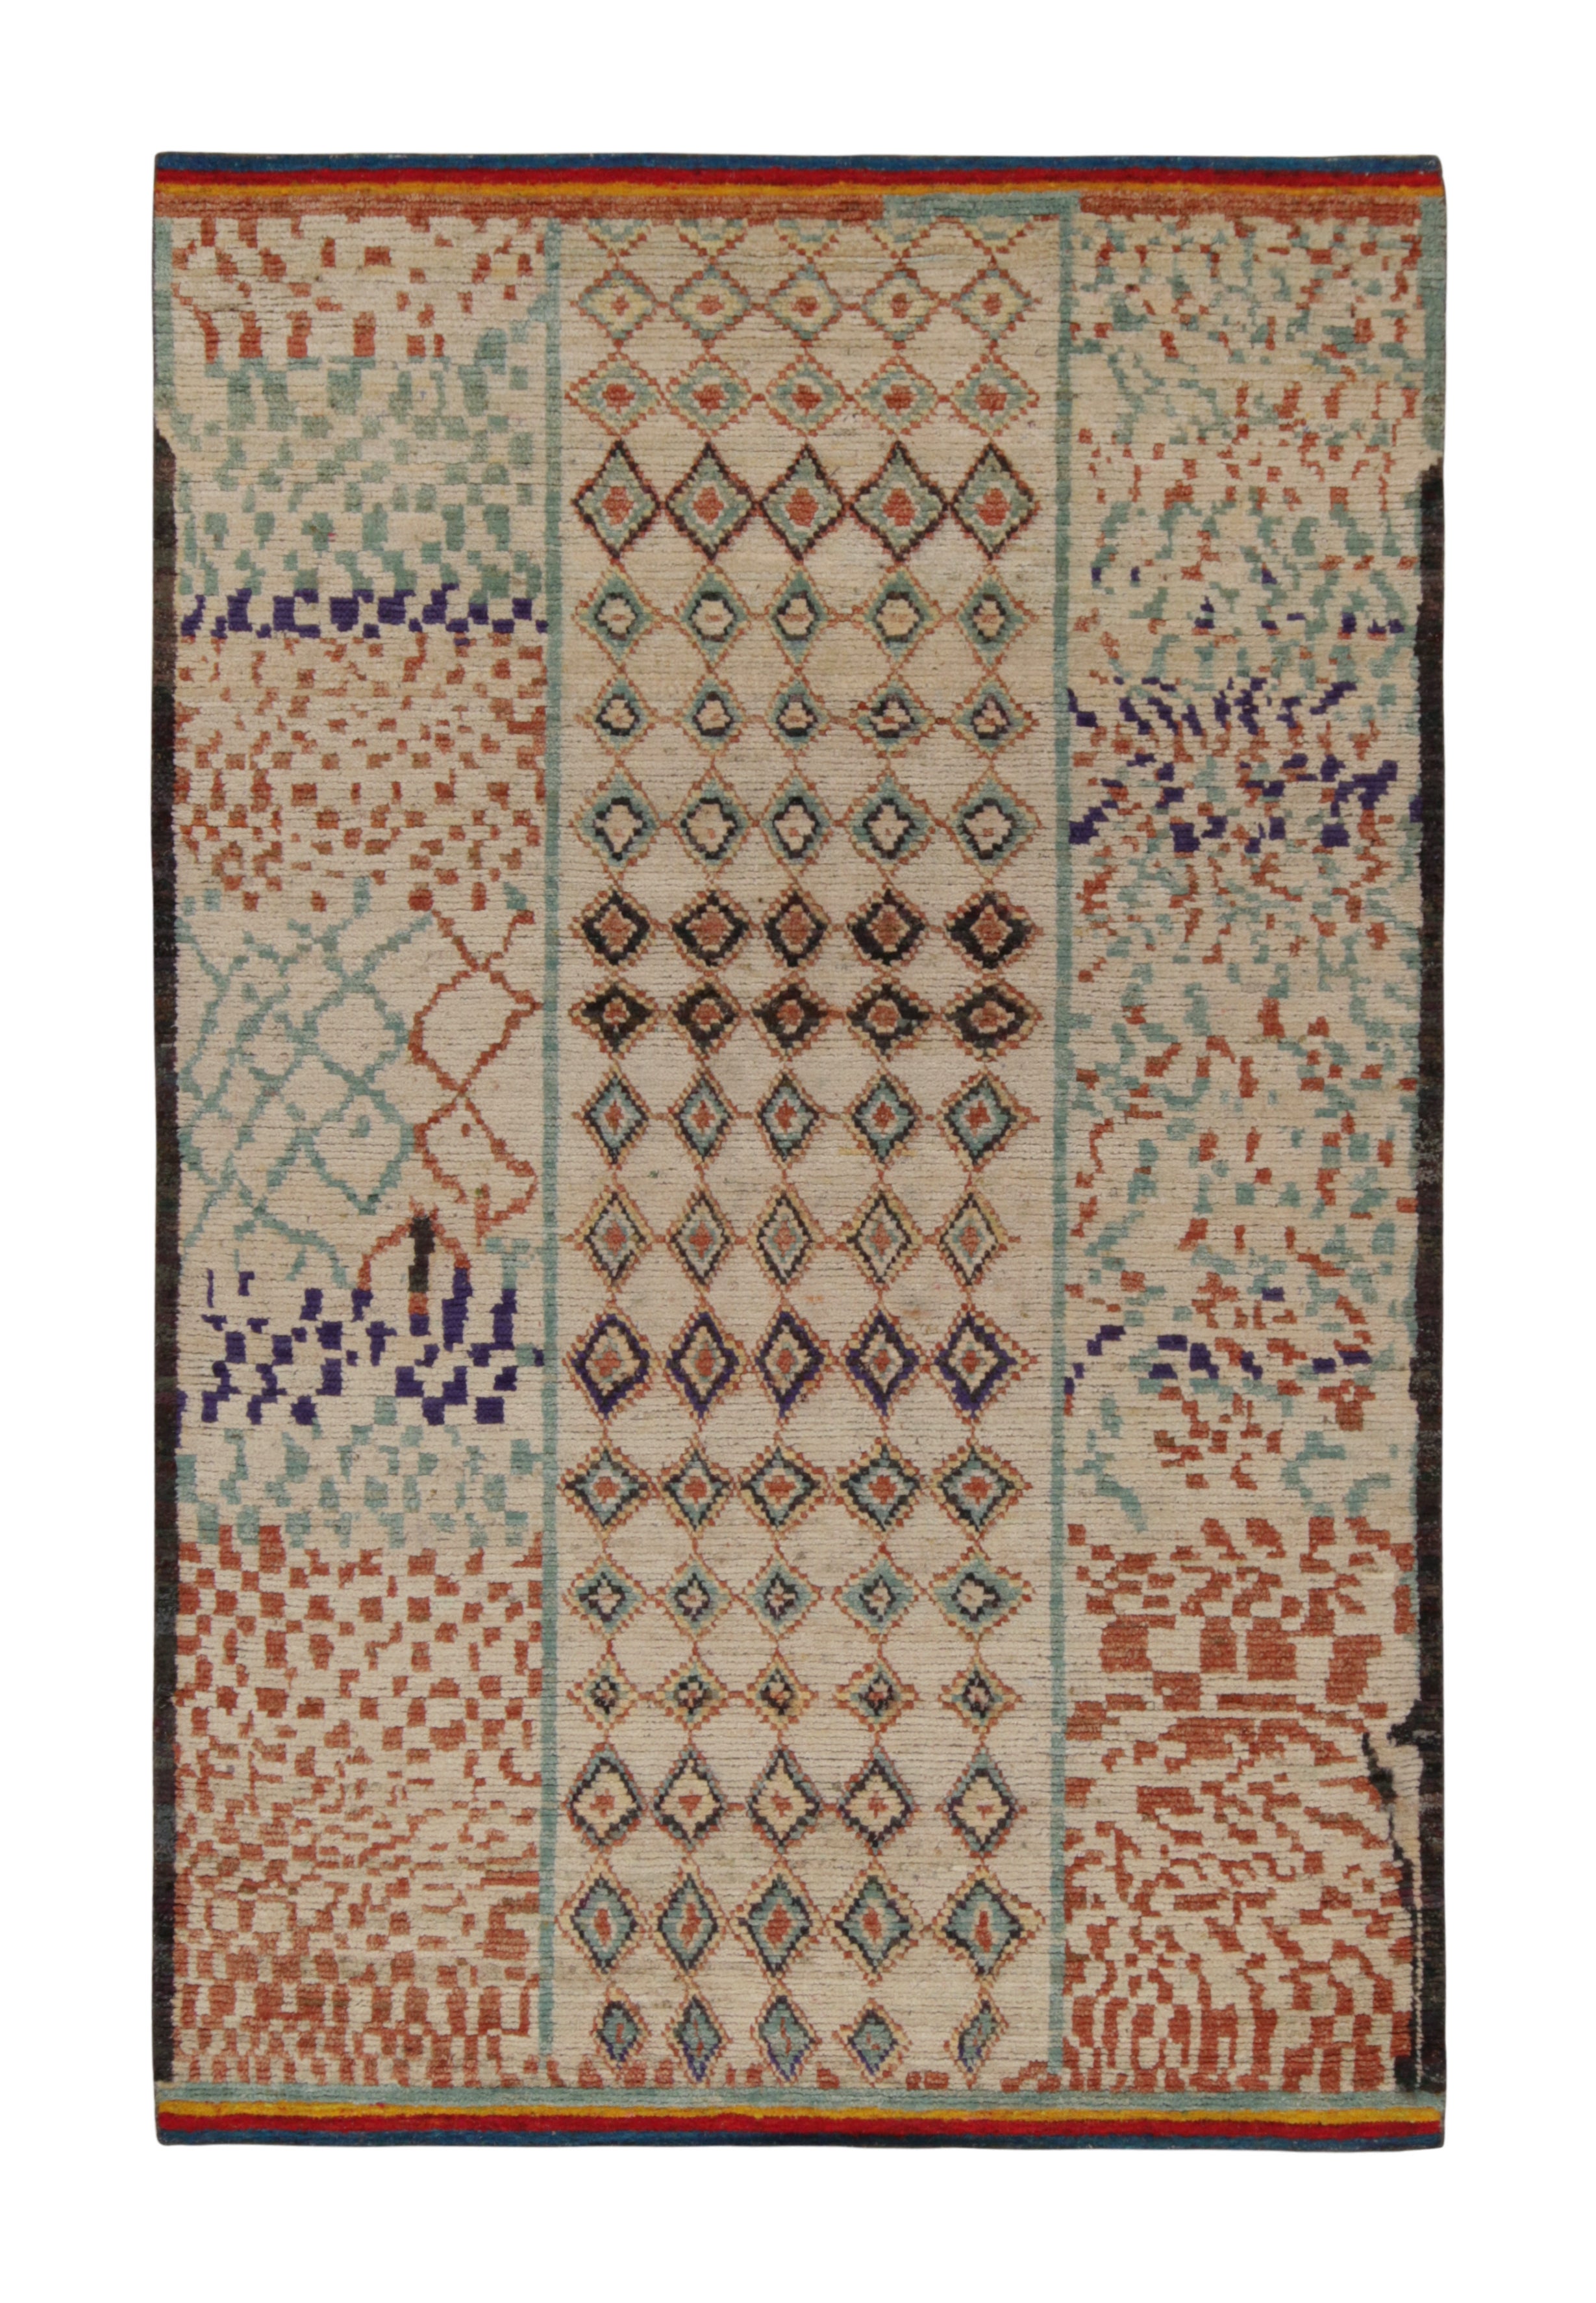 Rug & Kilim’s Moroccan Style Rug in Beige, Red and Blue Geometric Patterns